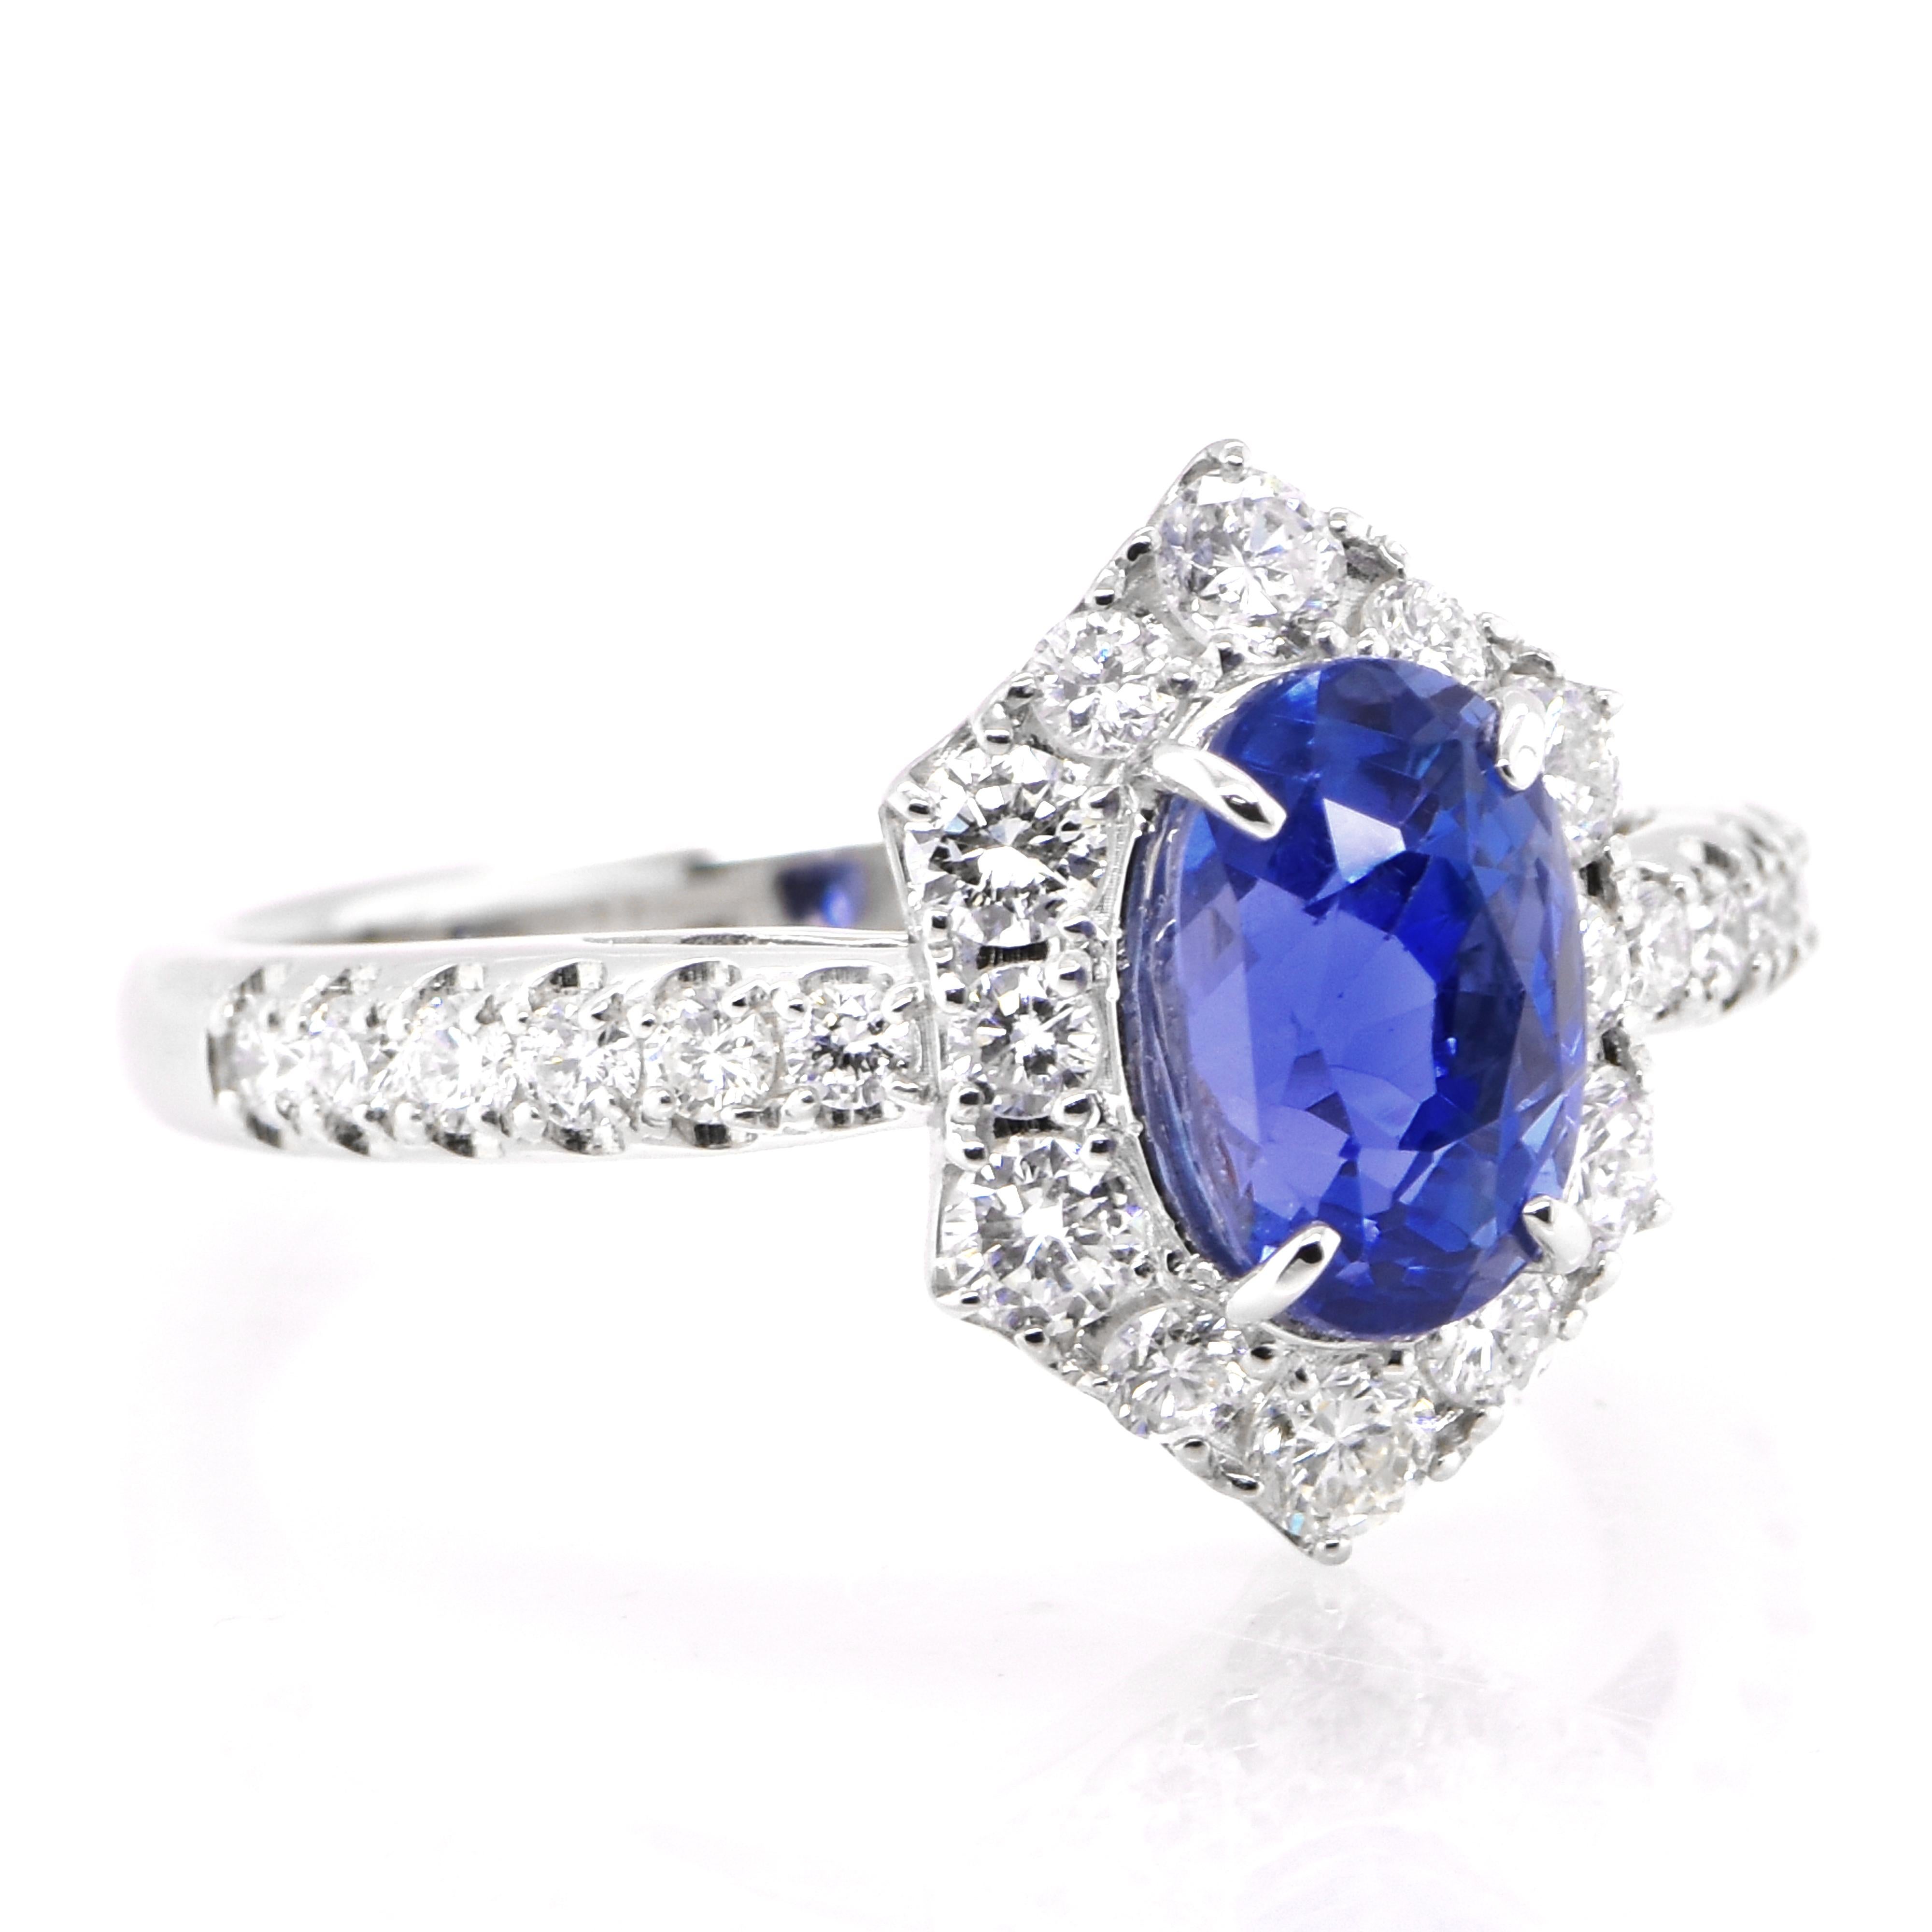 Modern 2.27 Carat Natural Unheated, Ceylon Sapphire and Diamond Ring set in Platinum For Sale